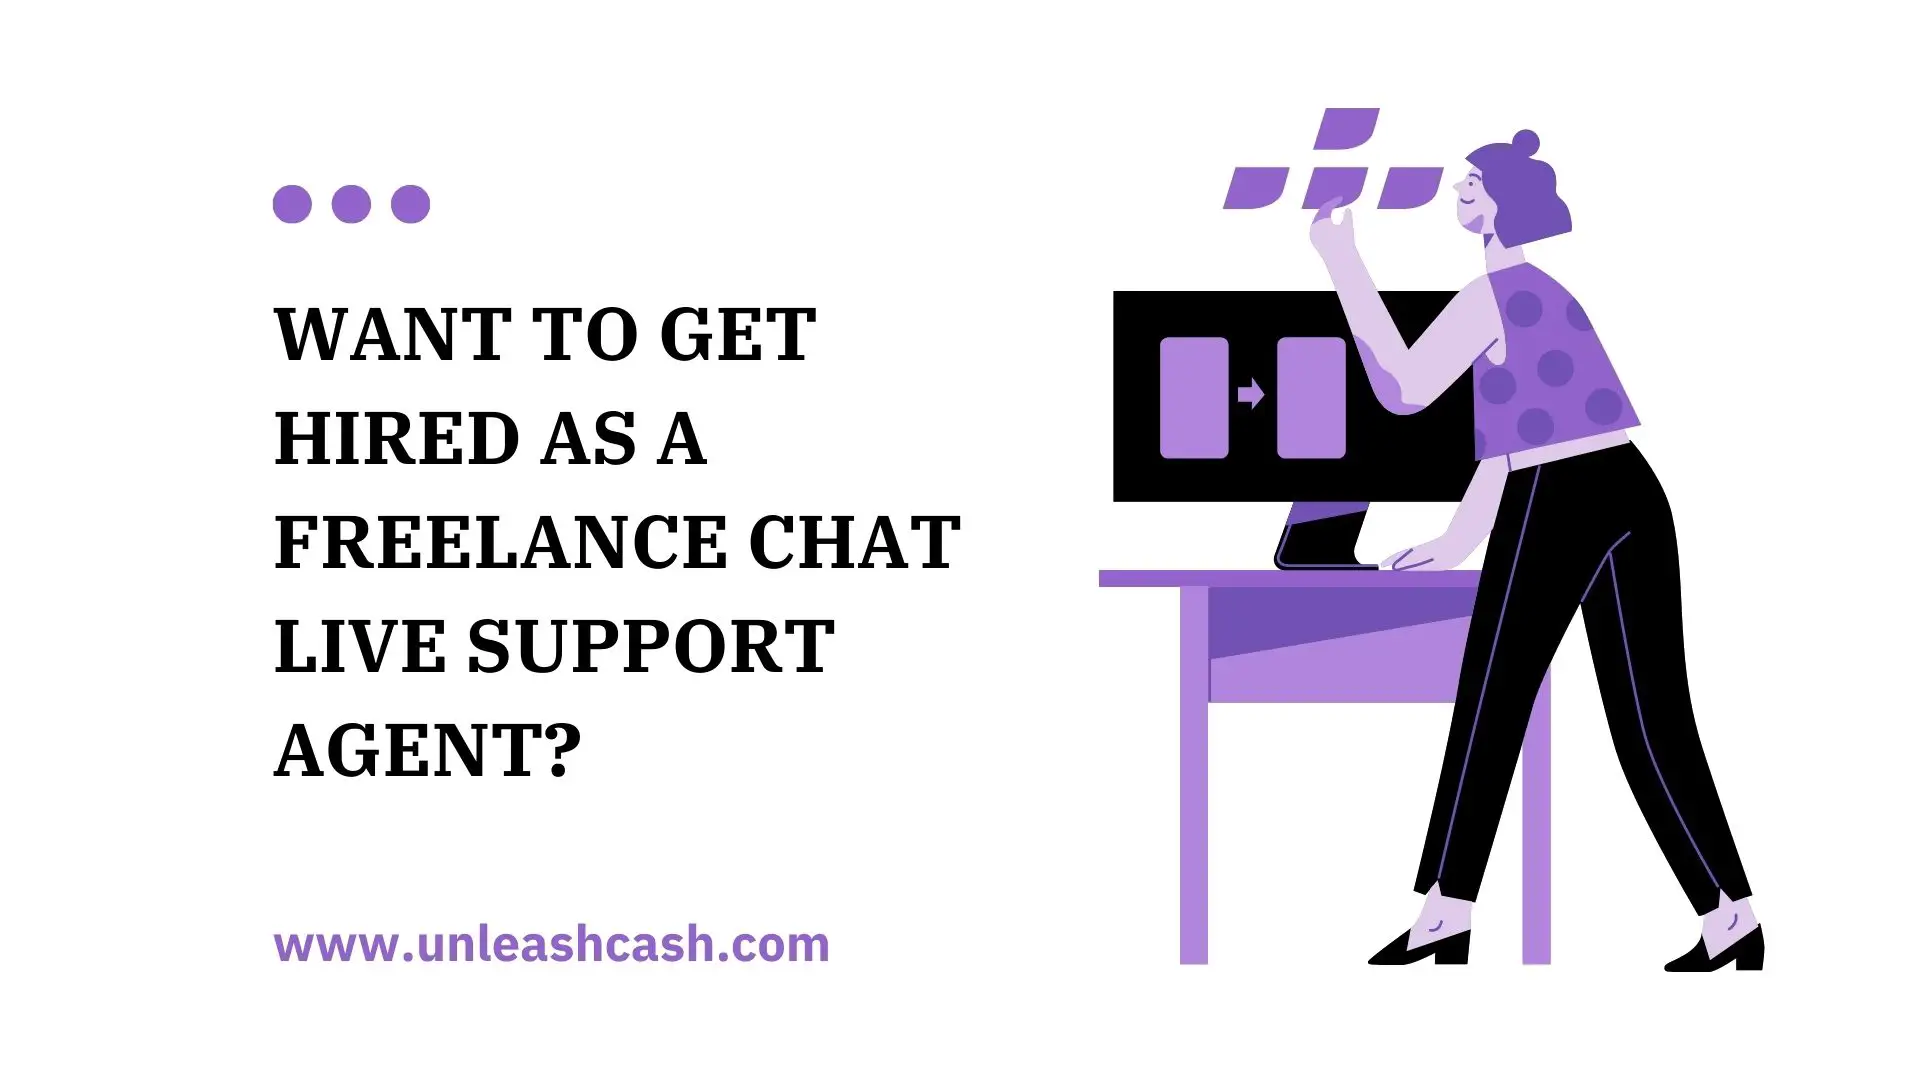 Want To Get Hired As A Freelance Chat Live Support Agent?